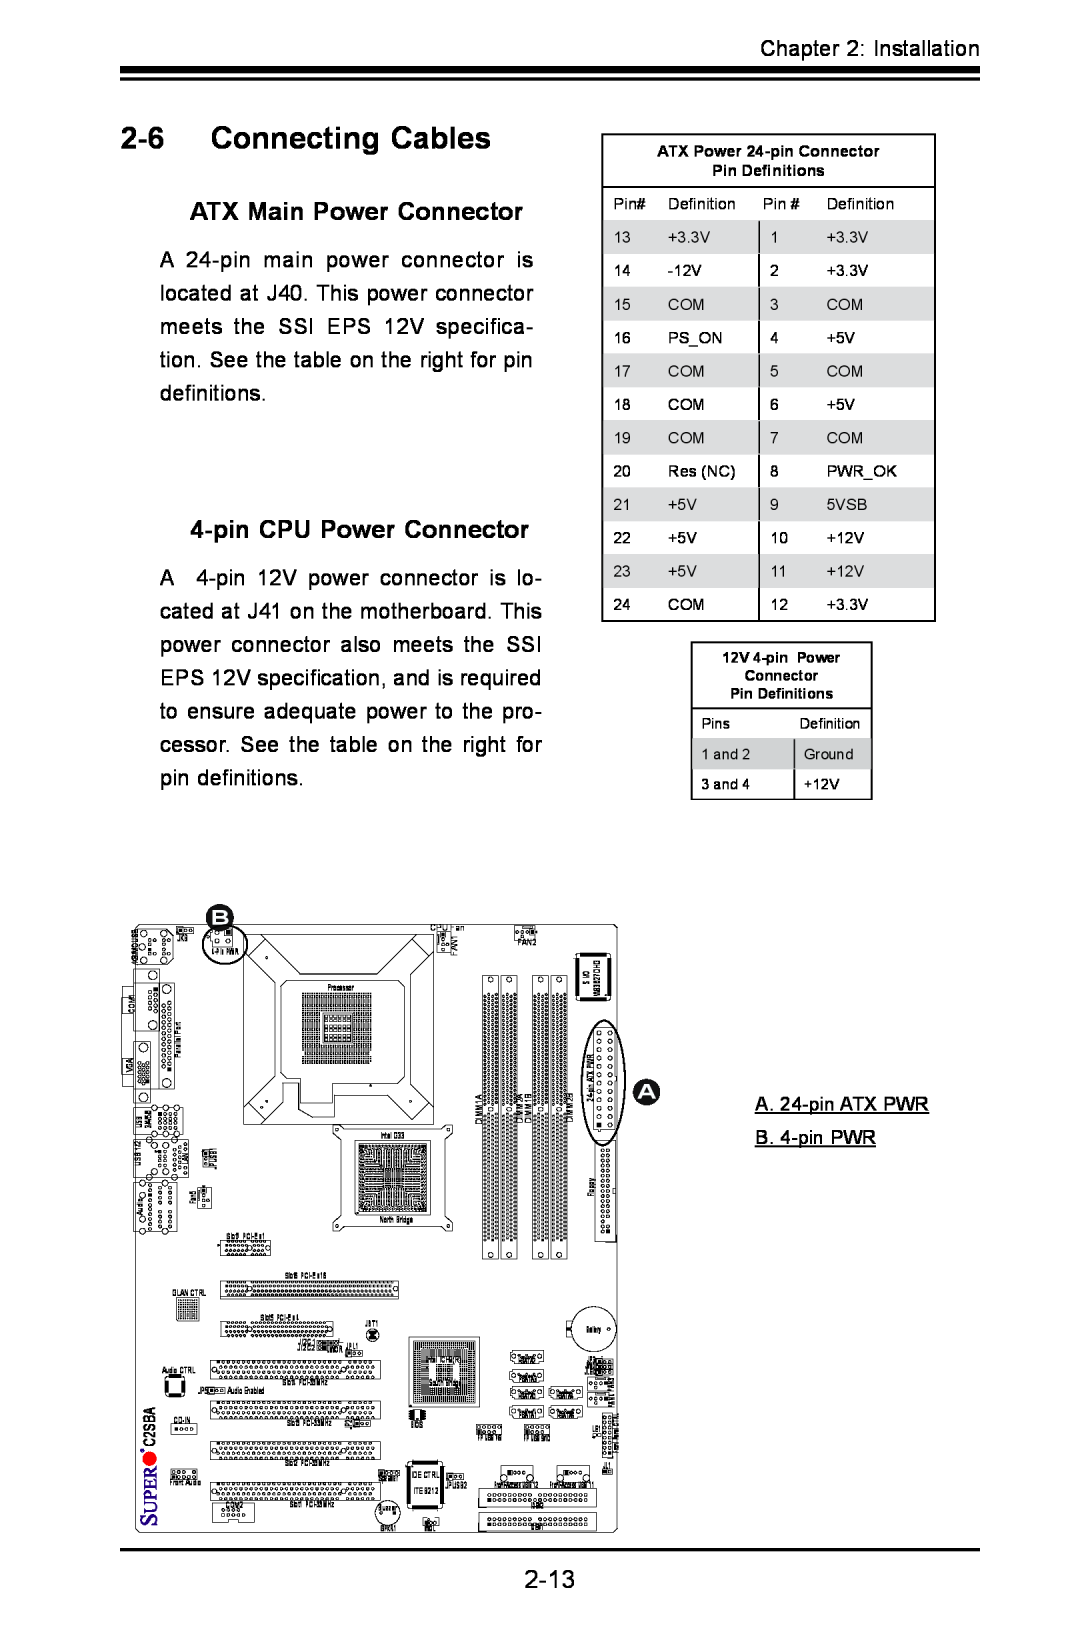 SUPER MICRO Computer C2SBE, C2SBA+II user manual Connecting Cables, ATX Main Power Connector, pin CPU Power Connector 